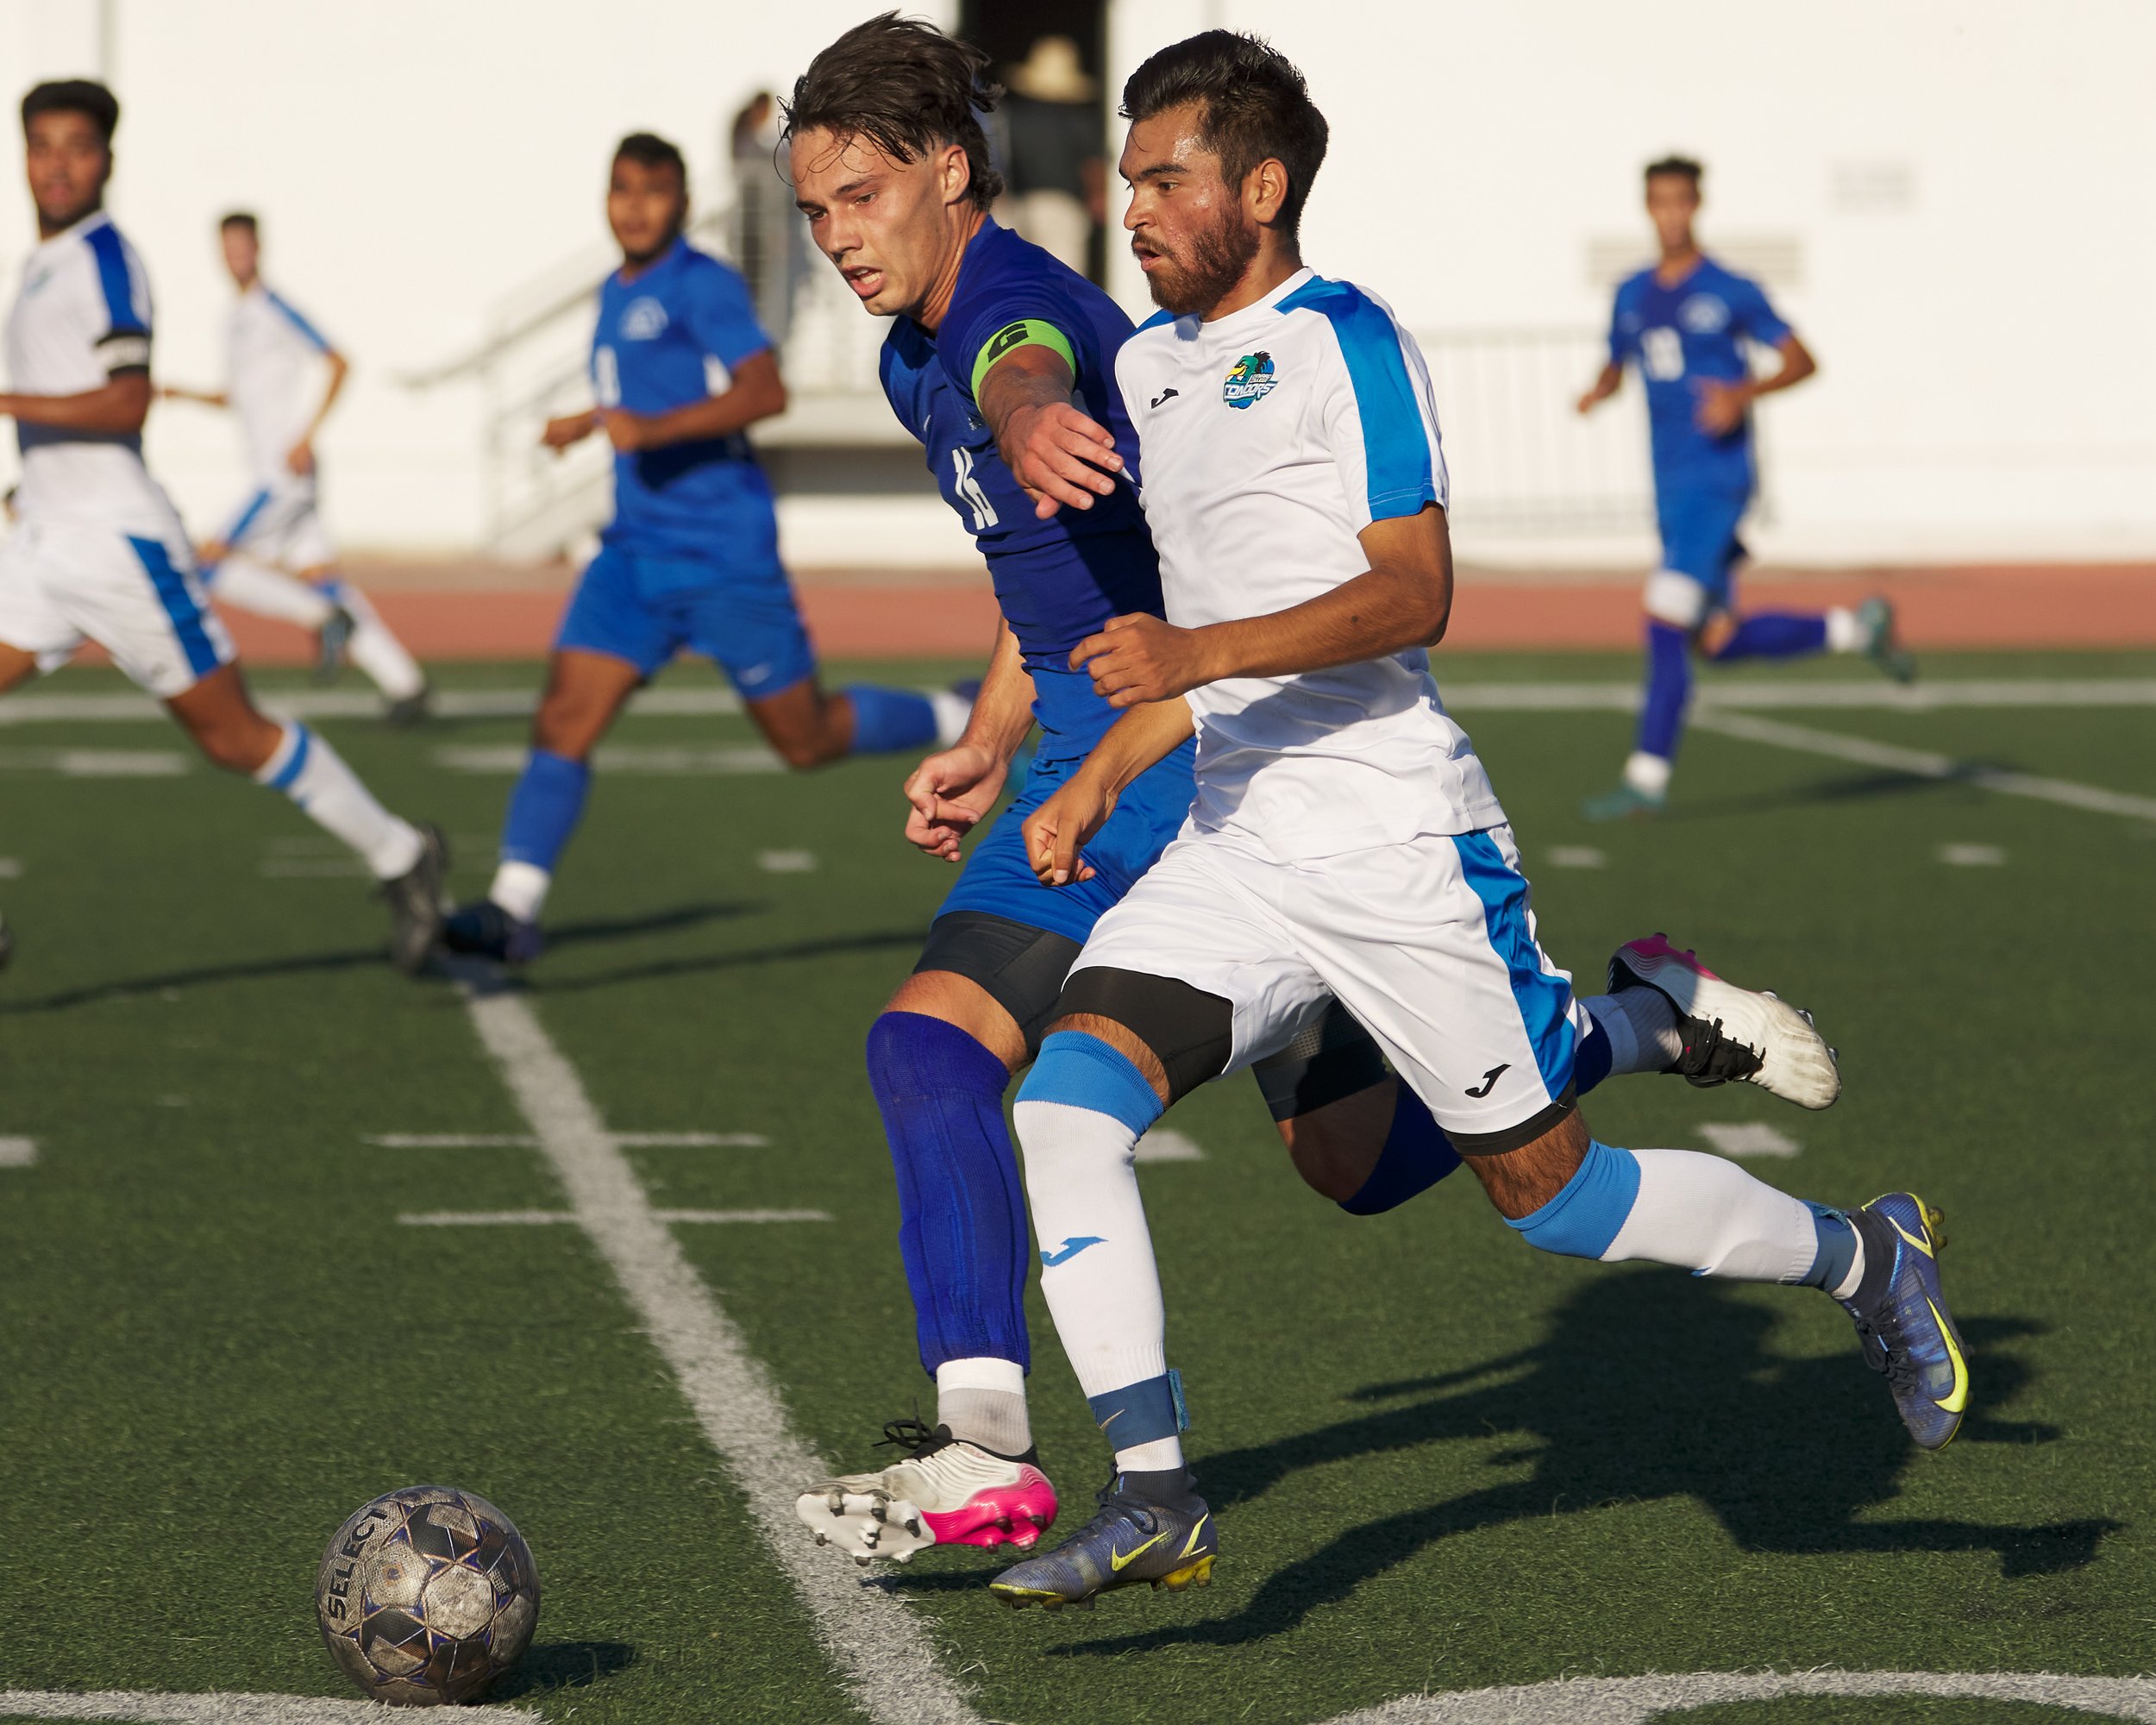  Santa Monica College Corsairs' Kyler Sorber attempts to steal the ball from Oxnard College Condors' Jose Ortiz during the men's soccer match on Tuesday, Oct. 18, 2022, at Corsair Field in Santa Monica, Calif. The Corsairs lost 0-3. (Nicholas McCall 